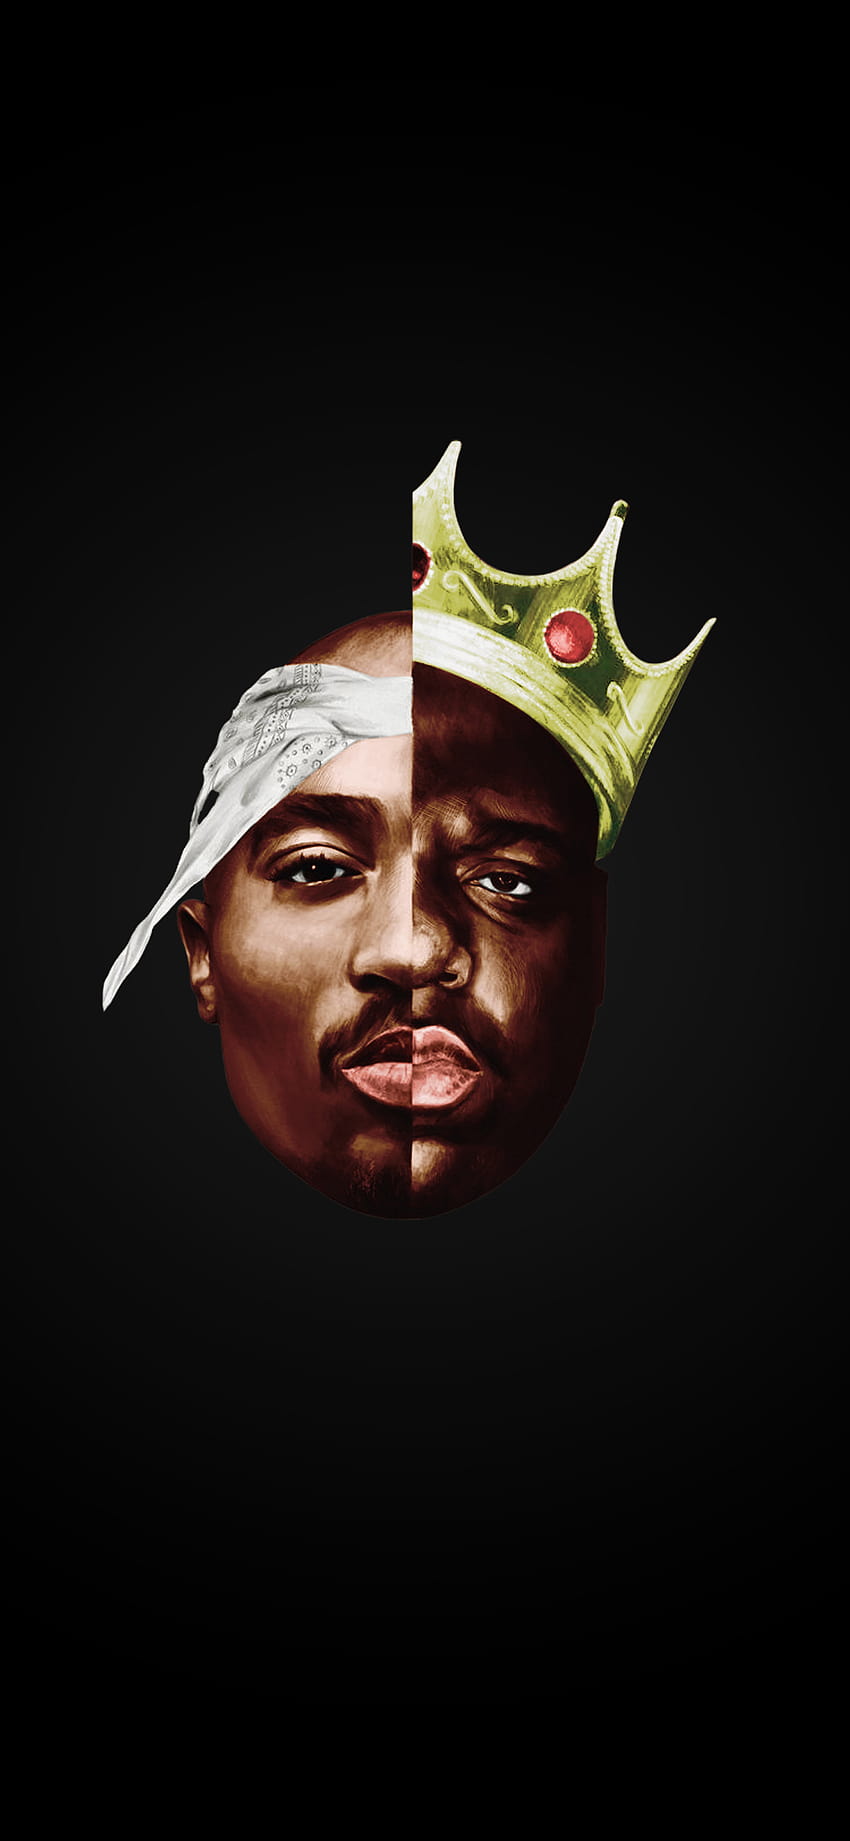 2Pac/The Notorious B.I.G.、2pac と Notorious Big HD電話の壁紙